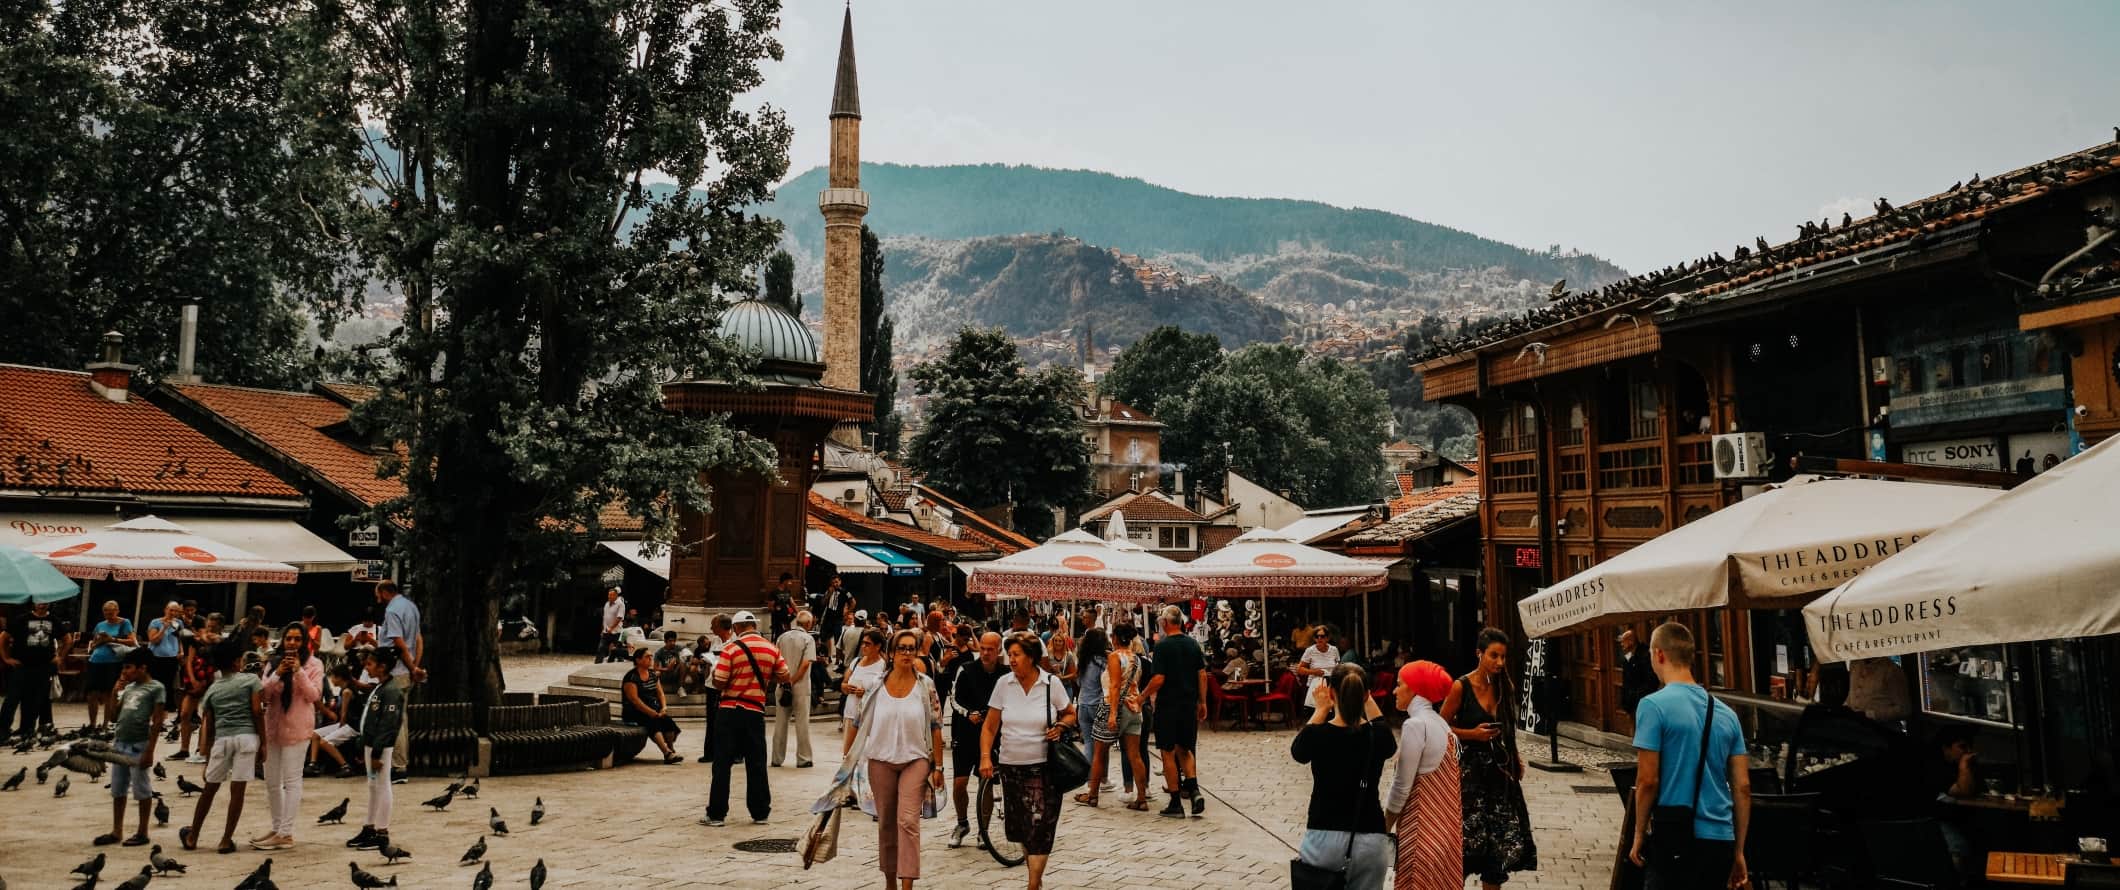 Historic square filled with pigeons and people and a minaret in the background in Sarajevo, Bosnia & Herzegovina